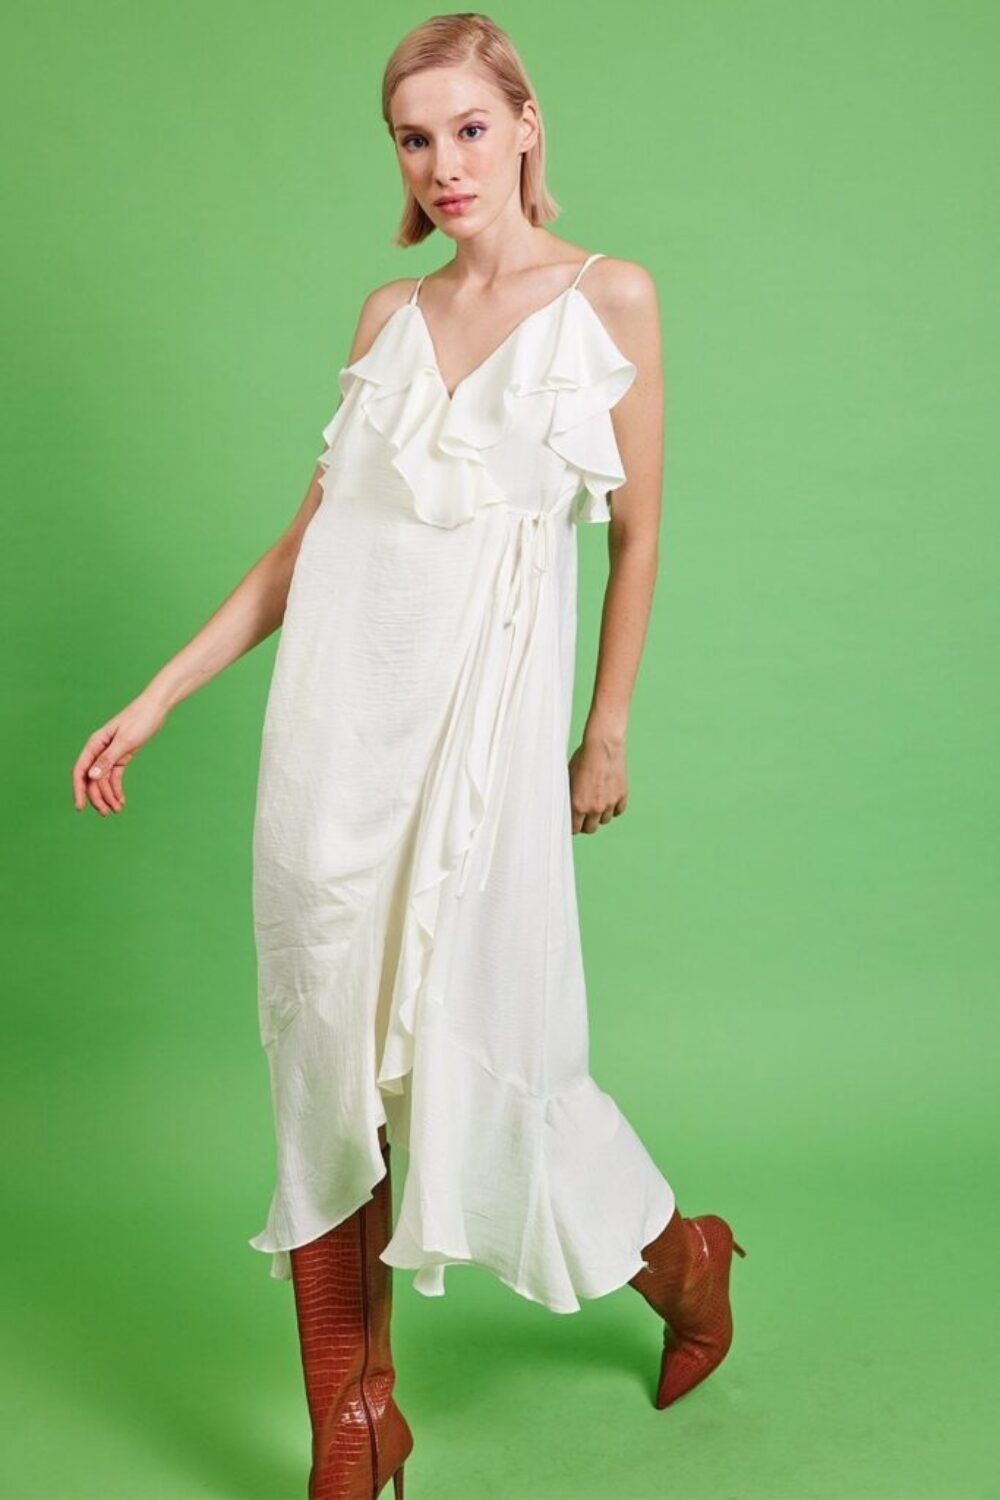 Shop Lux White Silk Blend Maxi Ruffle Dress and women's luxury and designer clothes at www.lux-apparel.co.uk